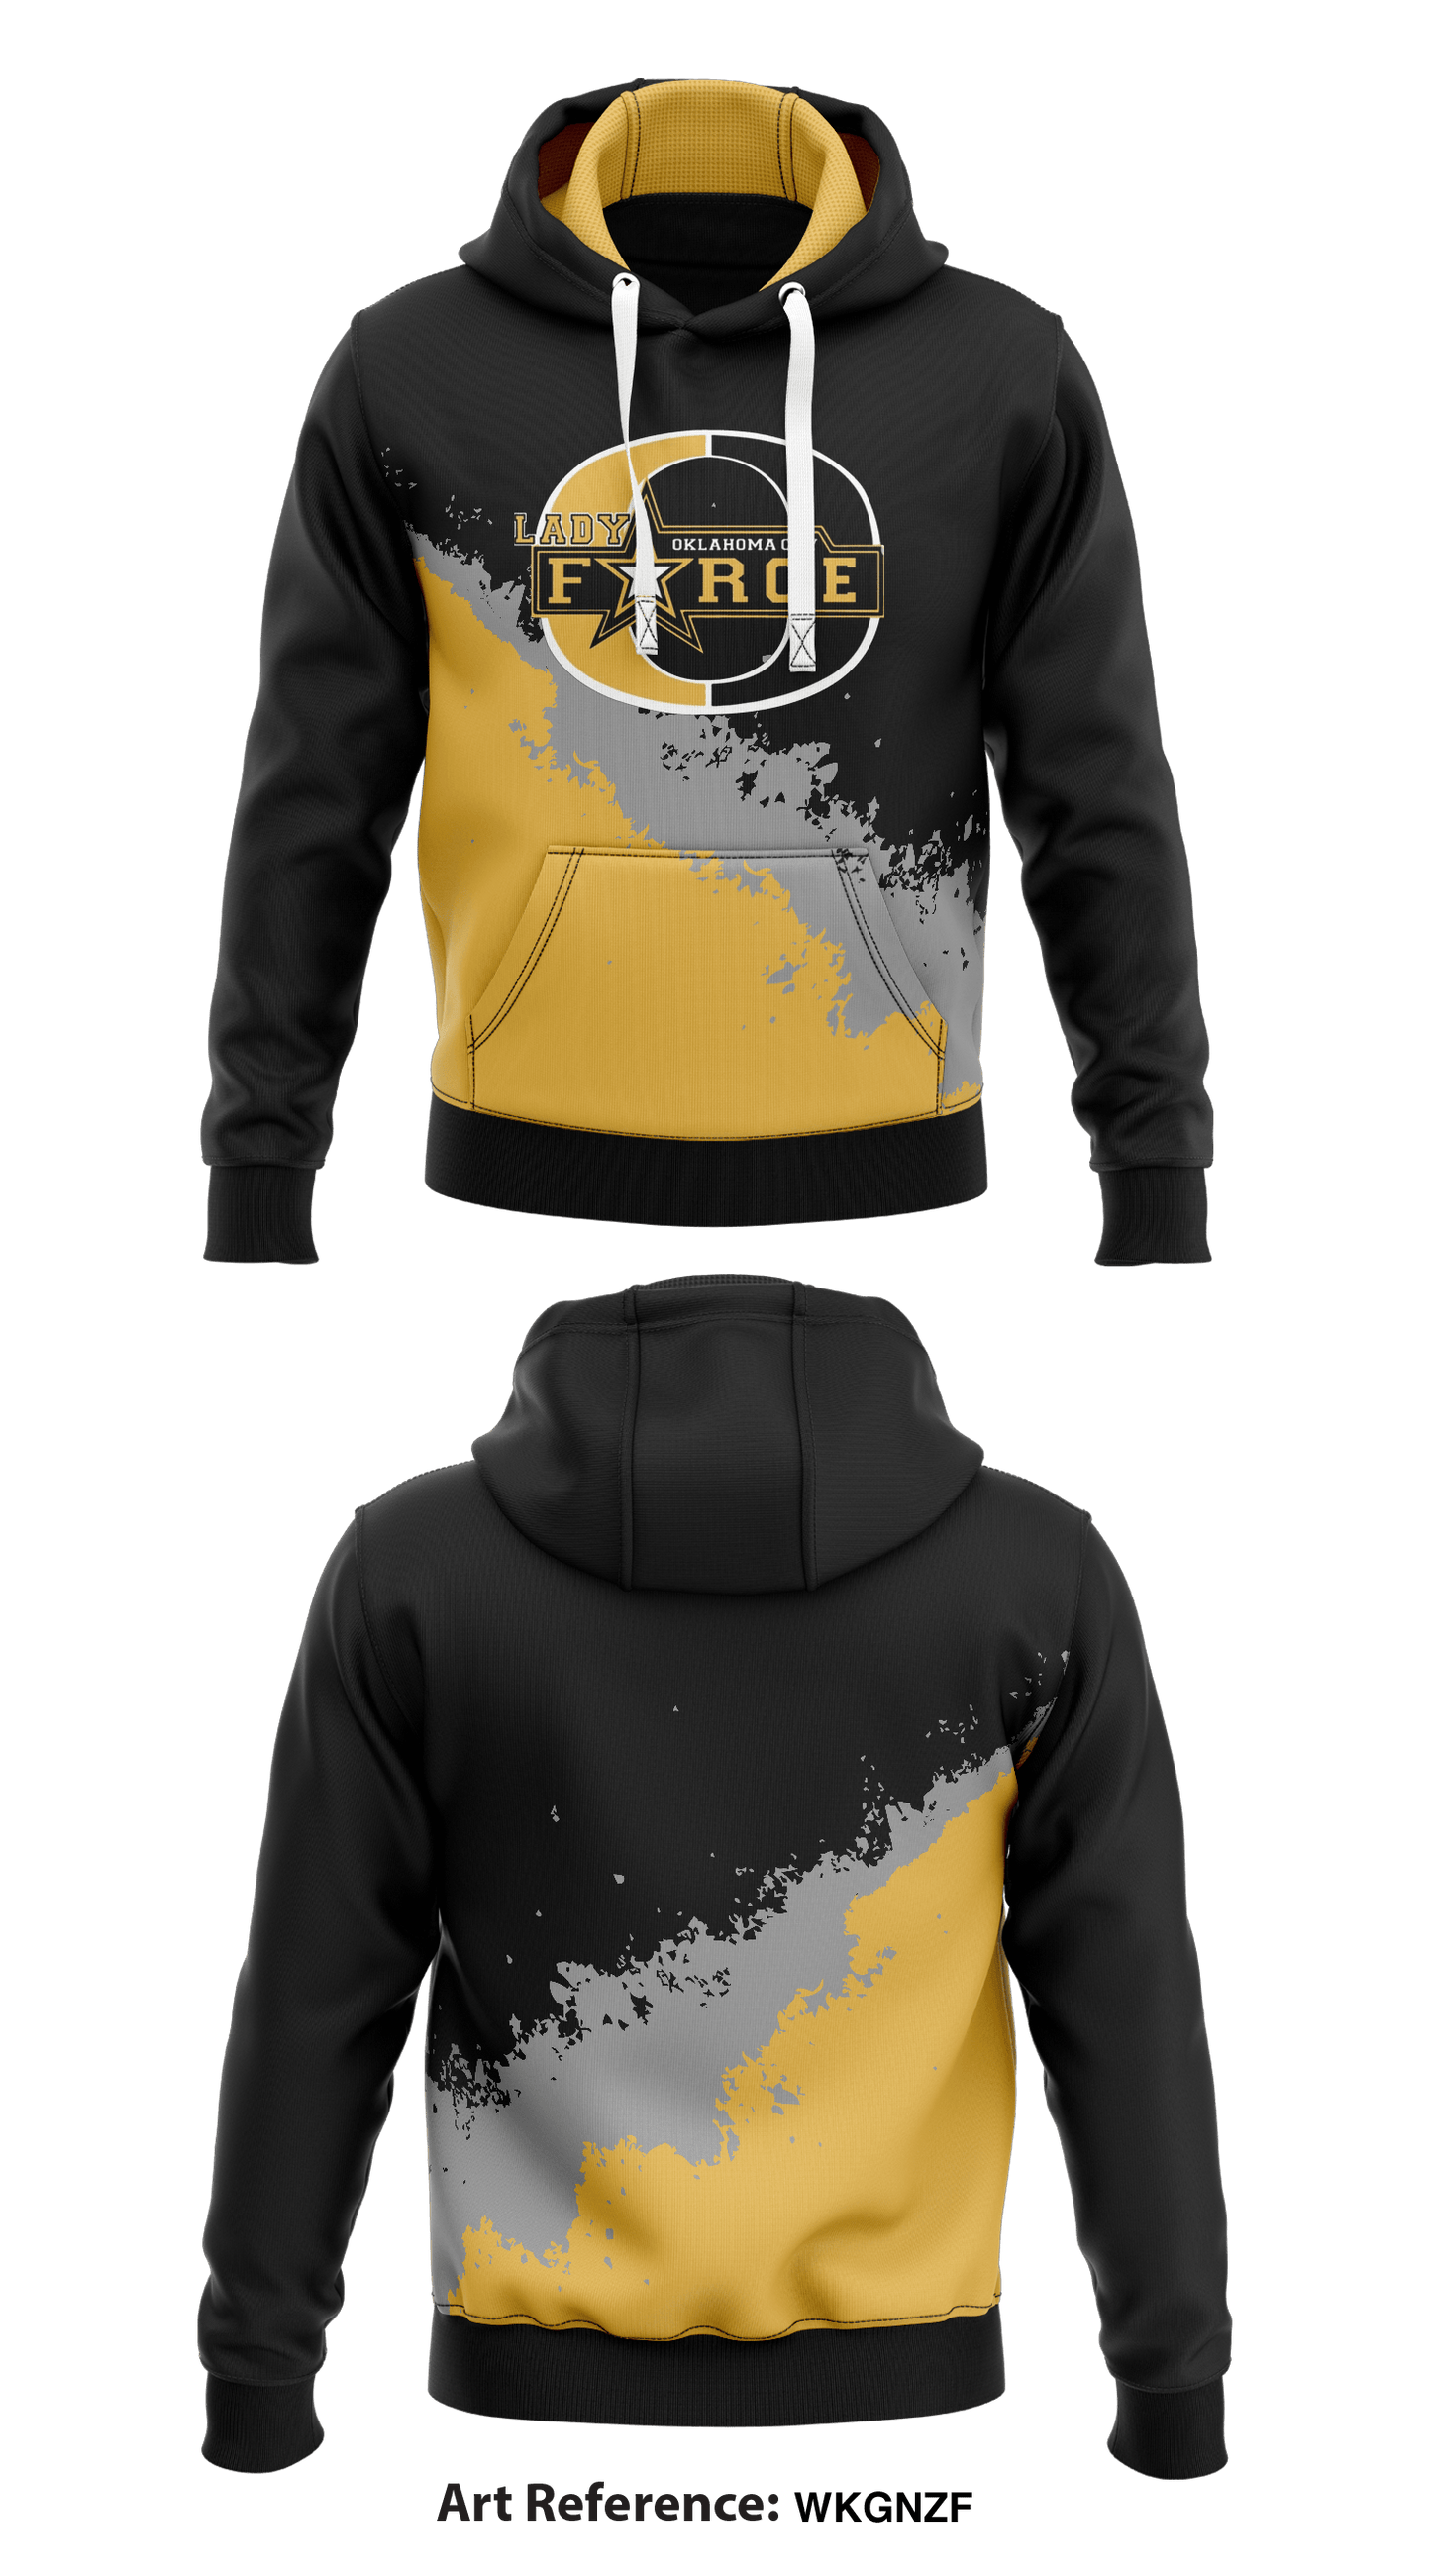 Lady Force female tackle football  Core Men's Hooded Performance Sweatshirt - wKGnzf